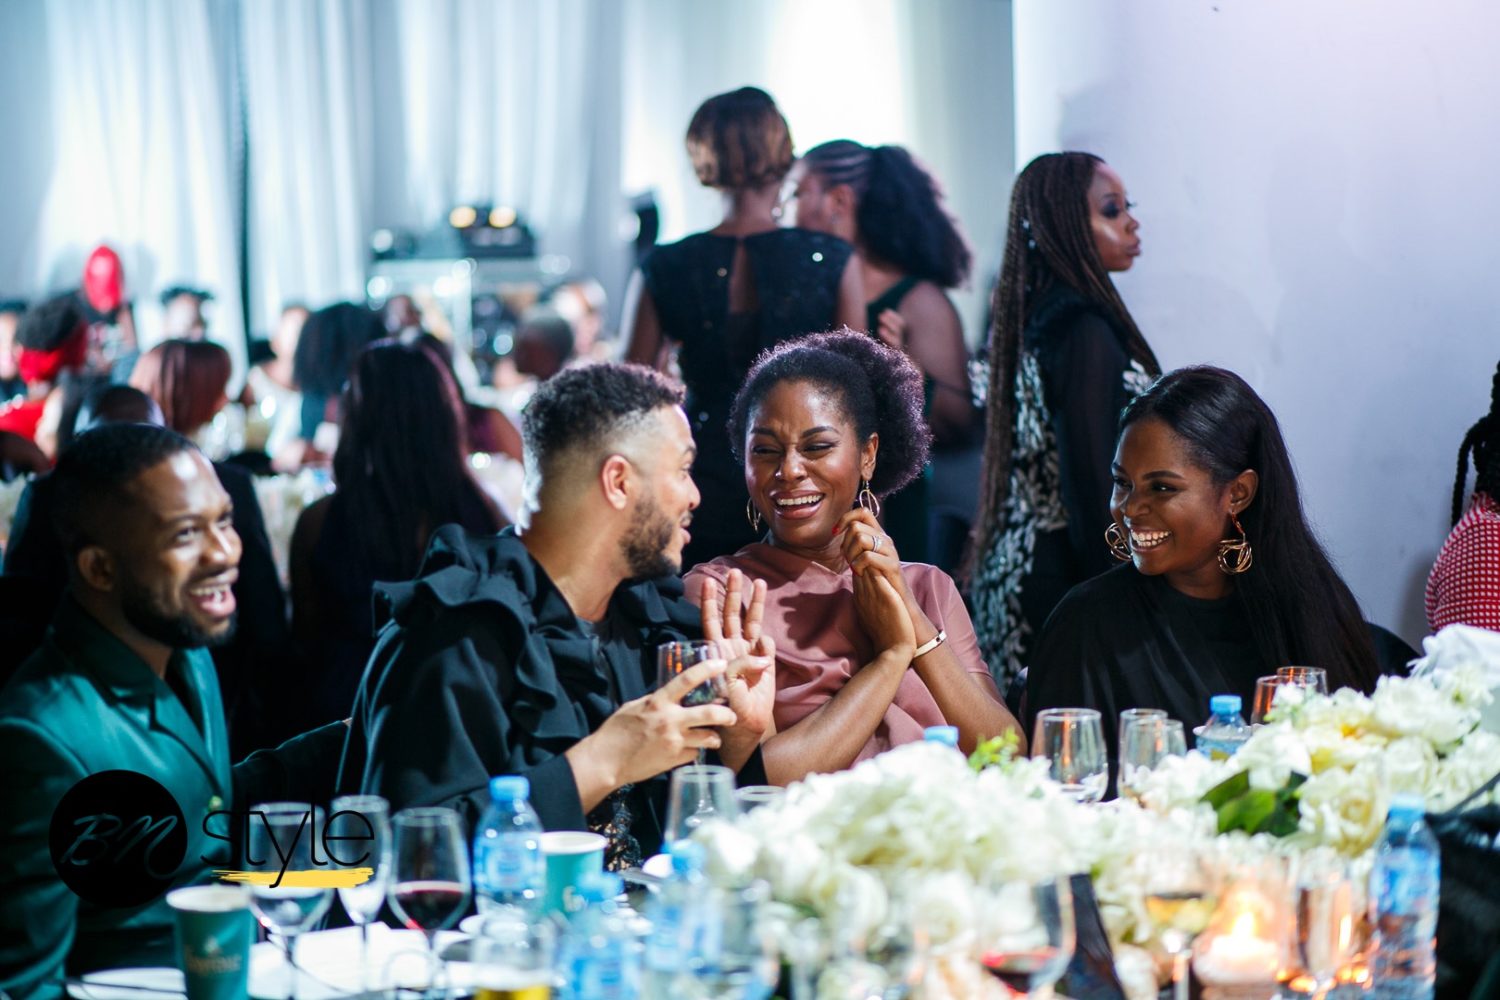 EXCLUSIVE: Here’s What Happened Last Night at “The Gathering”- Fashion Business Dinner @ Lagos Fashion Week 2018